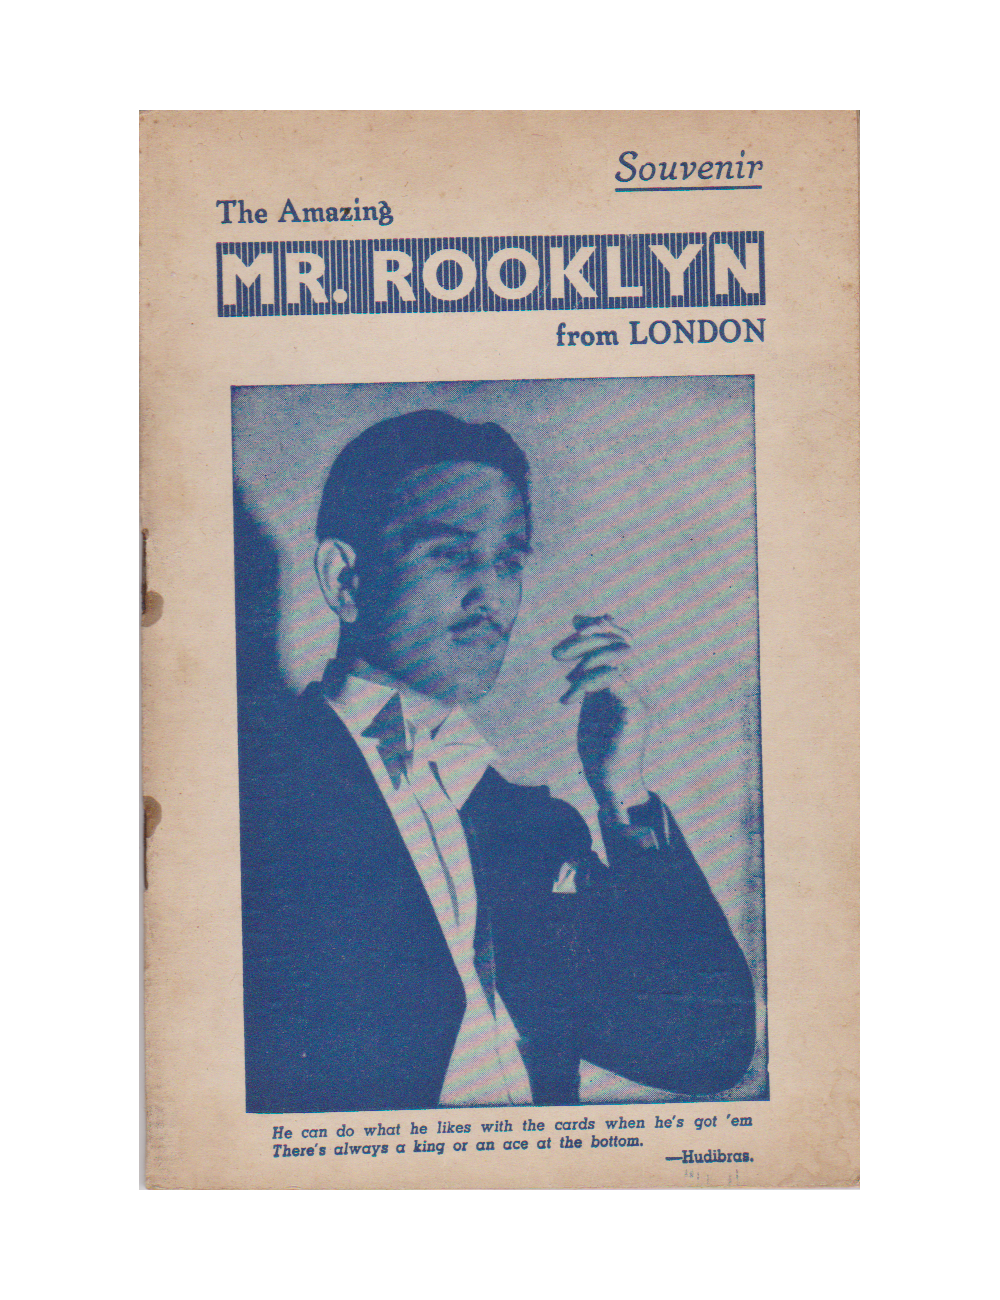 The Amazing MR. ROOKLYN from LONDON